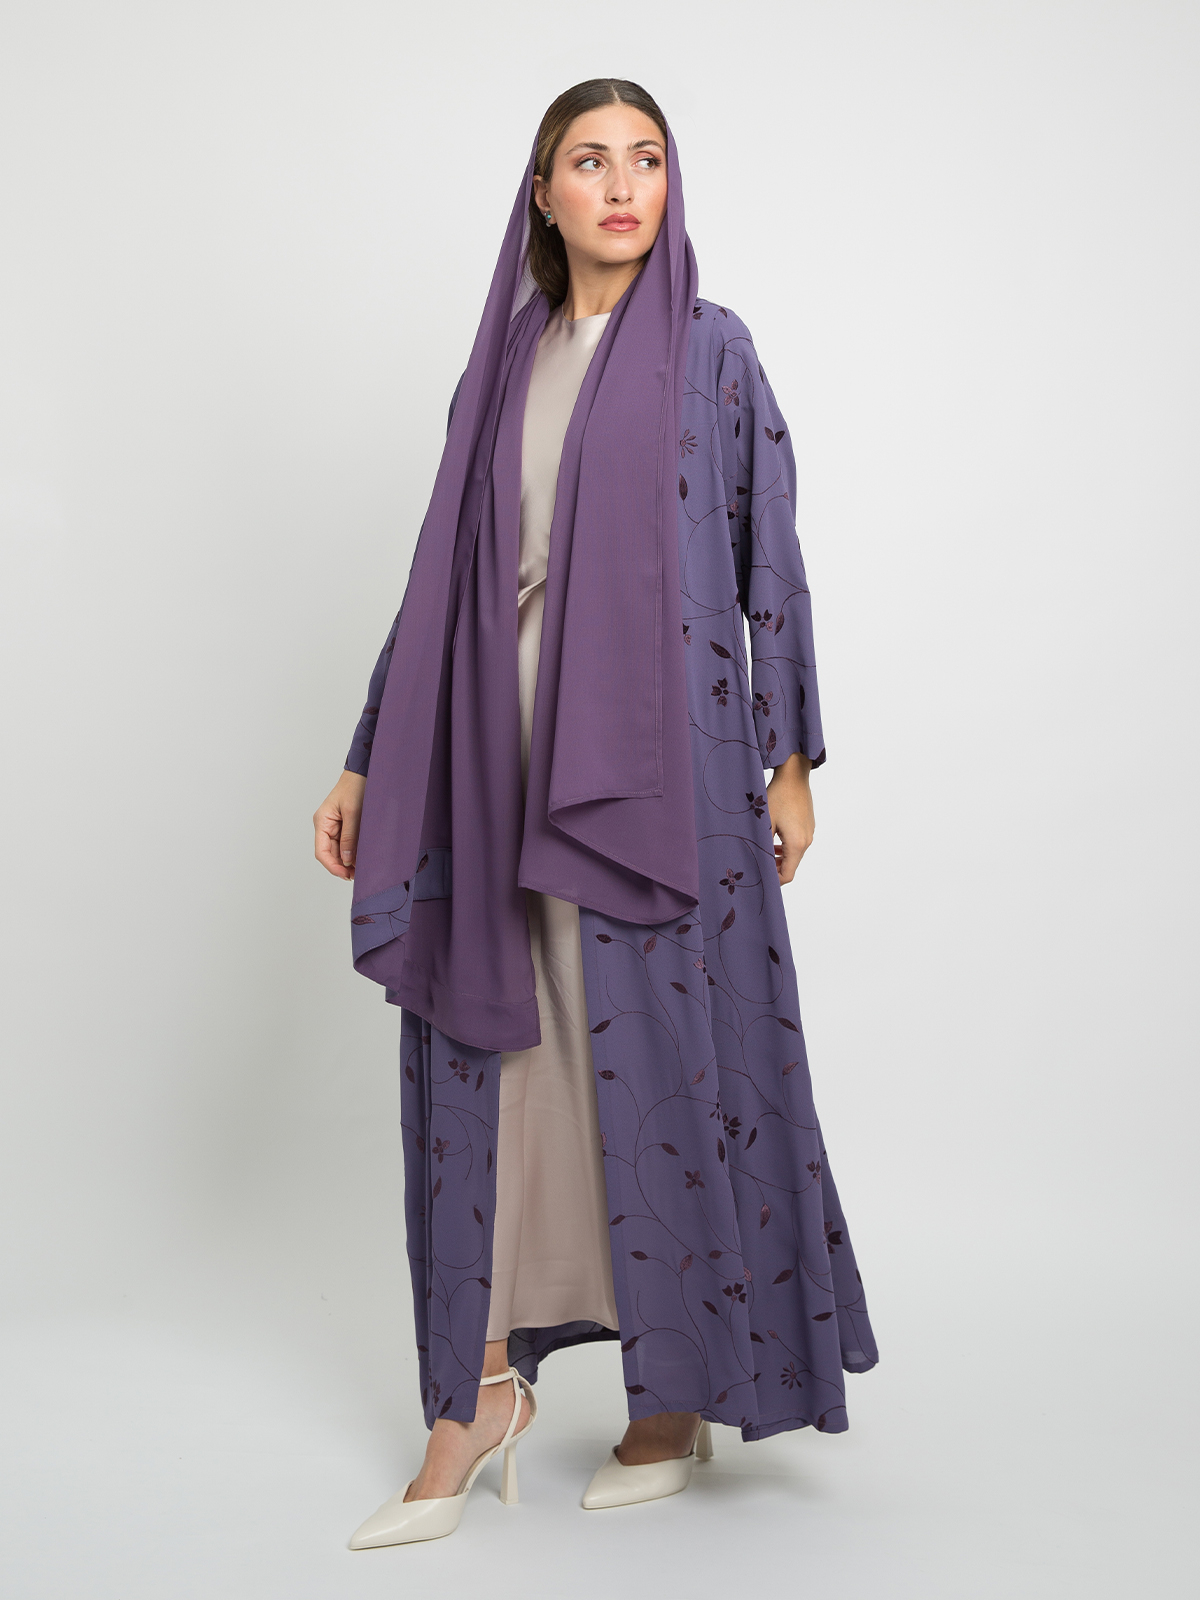 Purple - A Cut Long Open Half Cloche Abaya in Embroidered Light Fabric